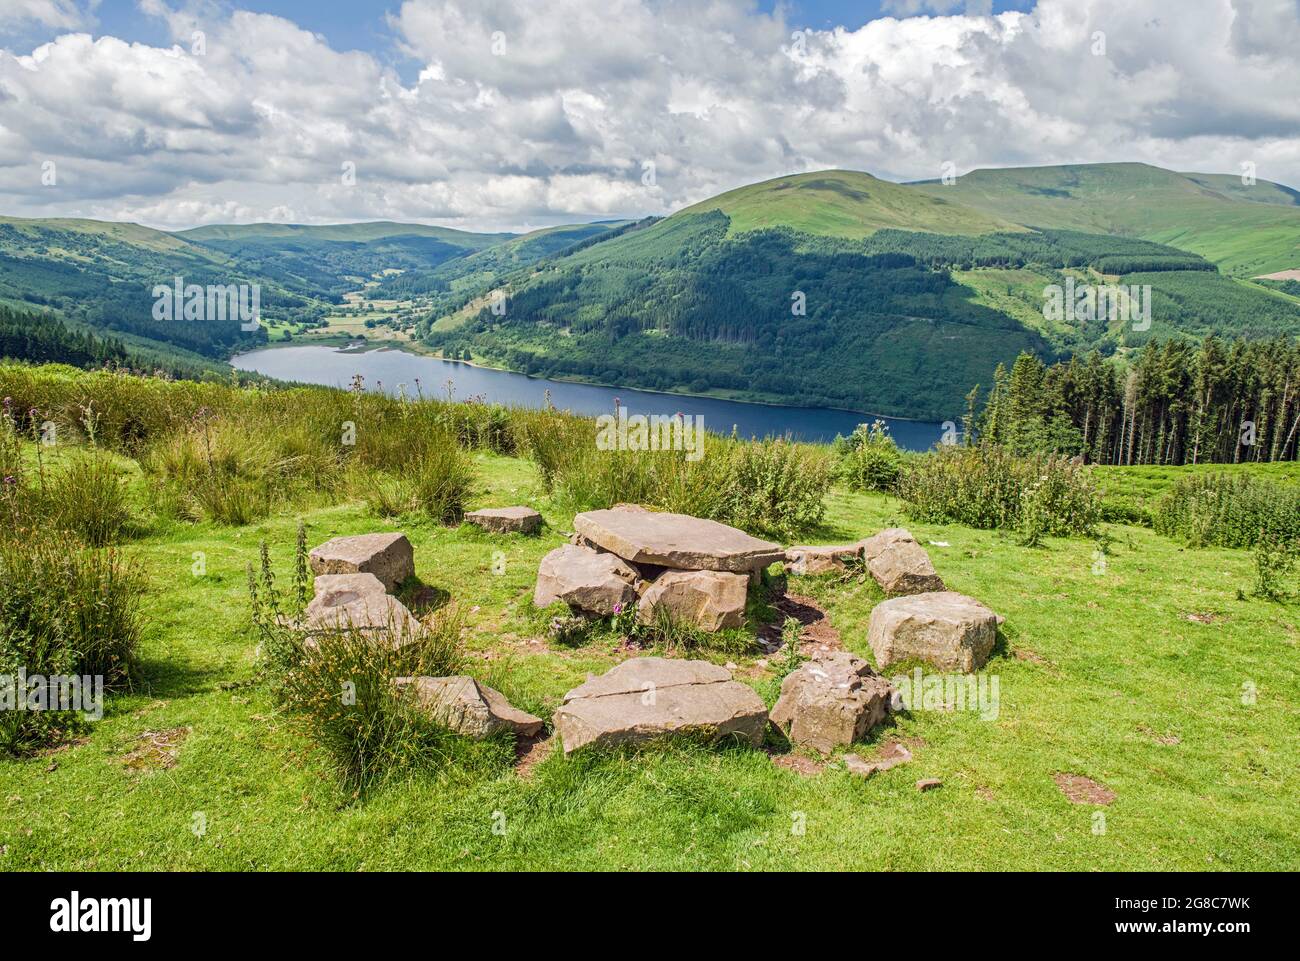 A Brecon Beacons landscape showing the Talybont Valley, Waun Rydd in the right distance and a stone table and chairs Stock Photo